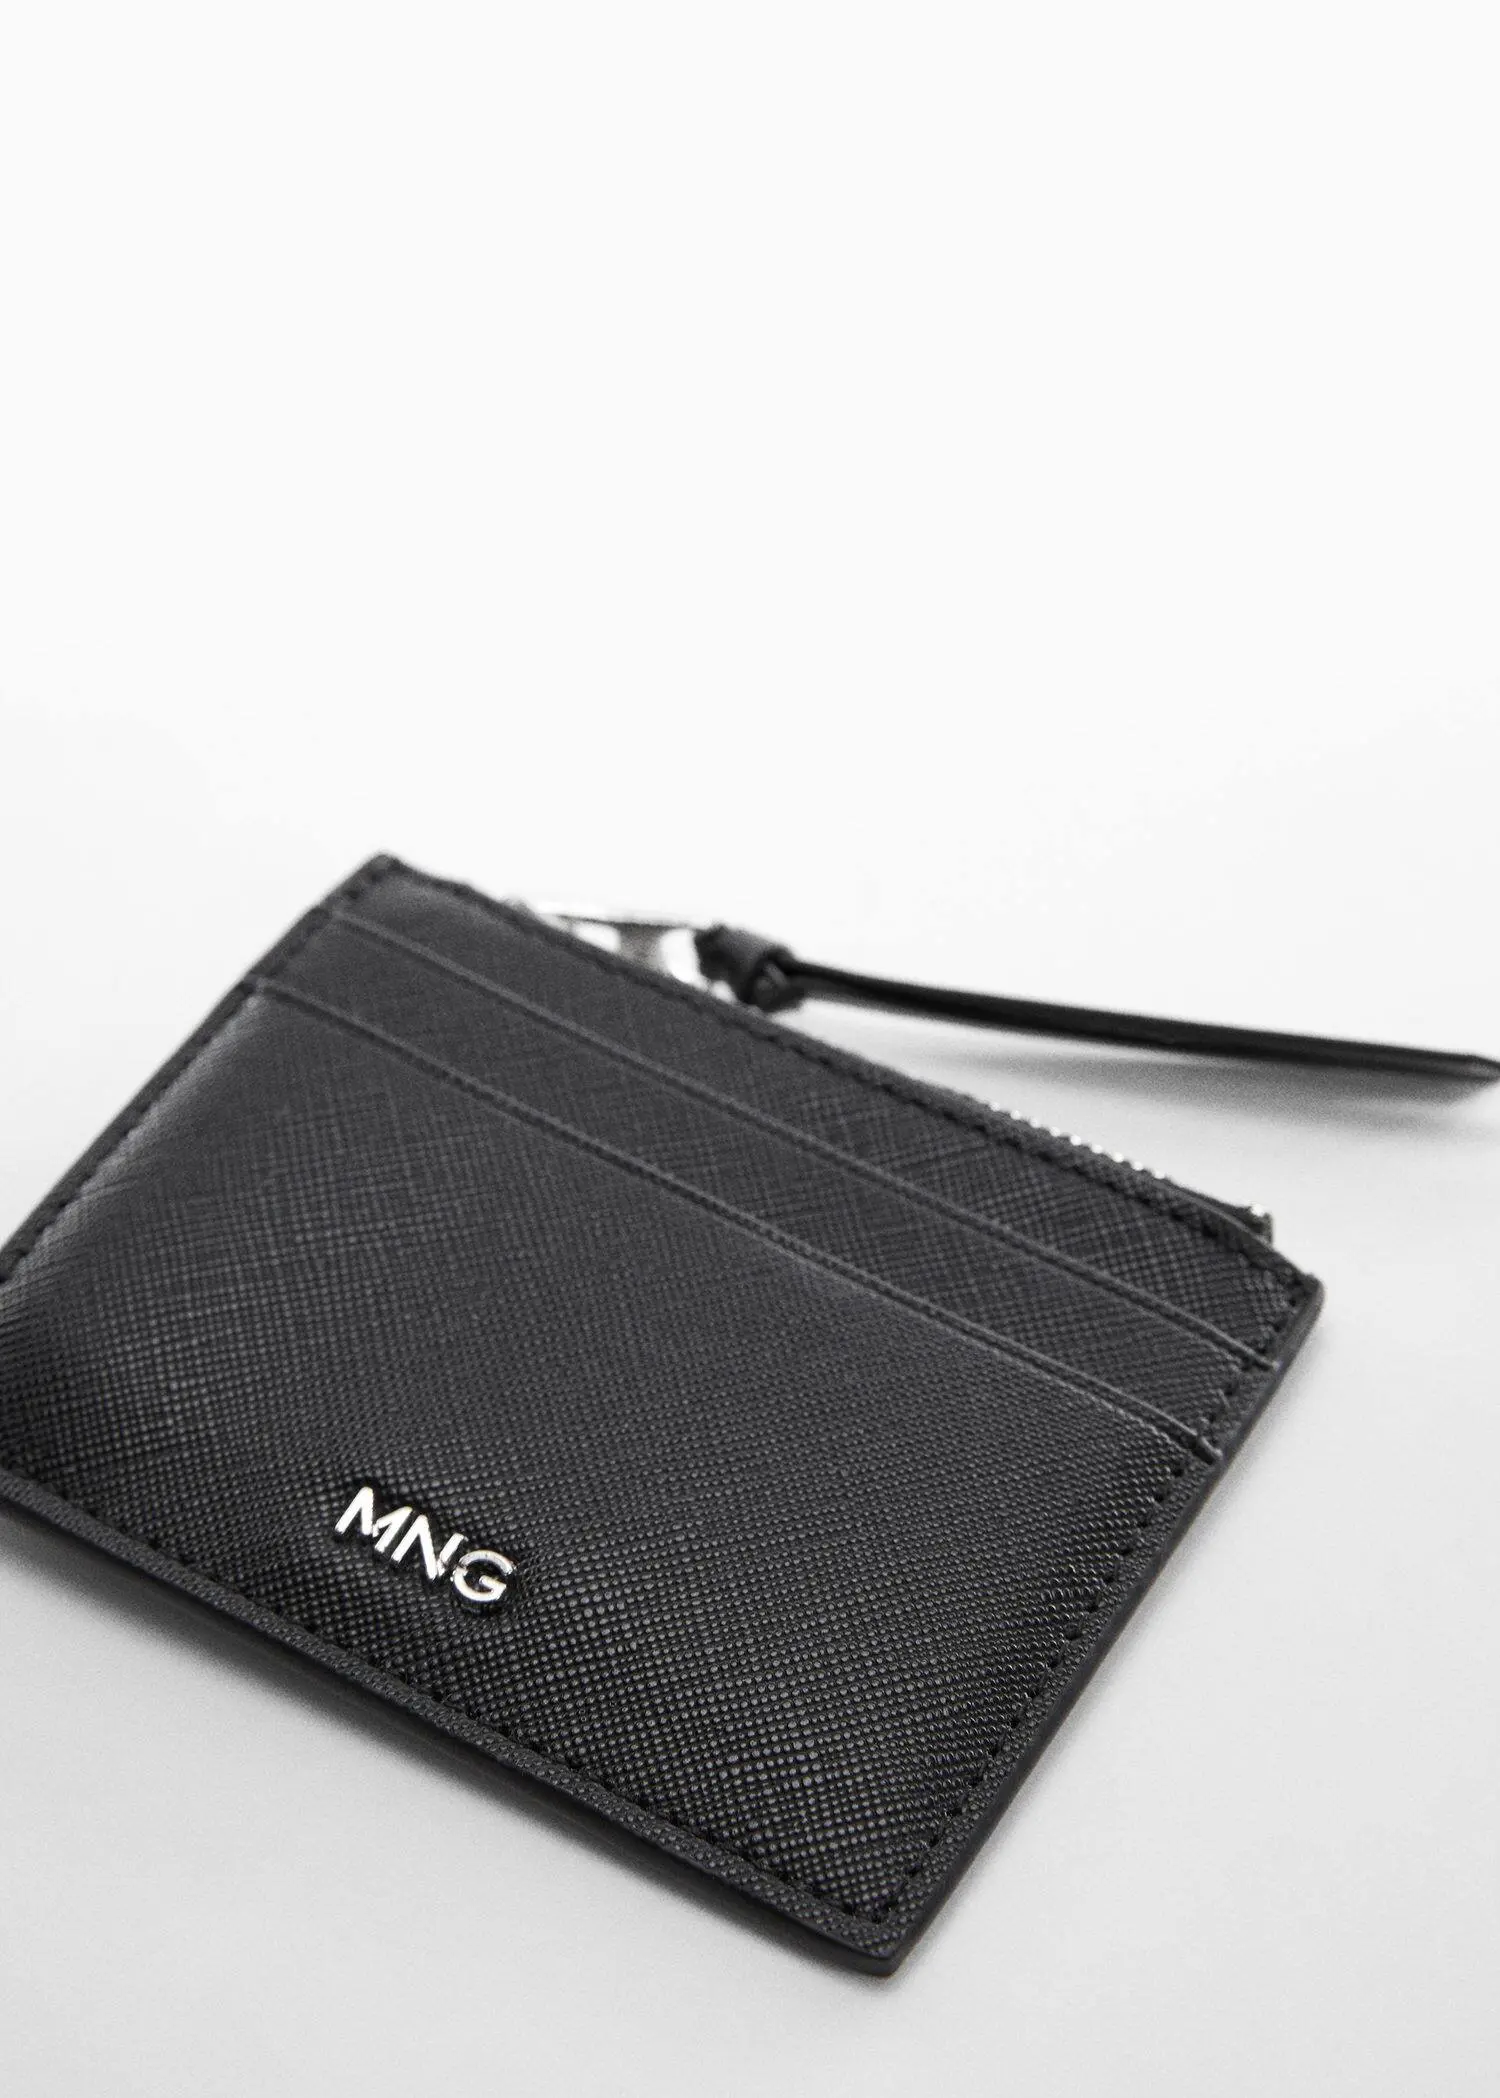 Mango Saffiano-effect cardholder. a close-up of a card holder on a table. 